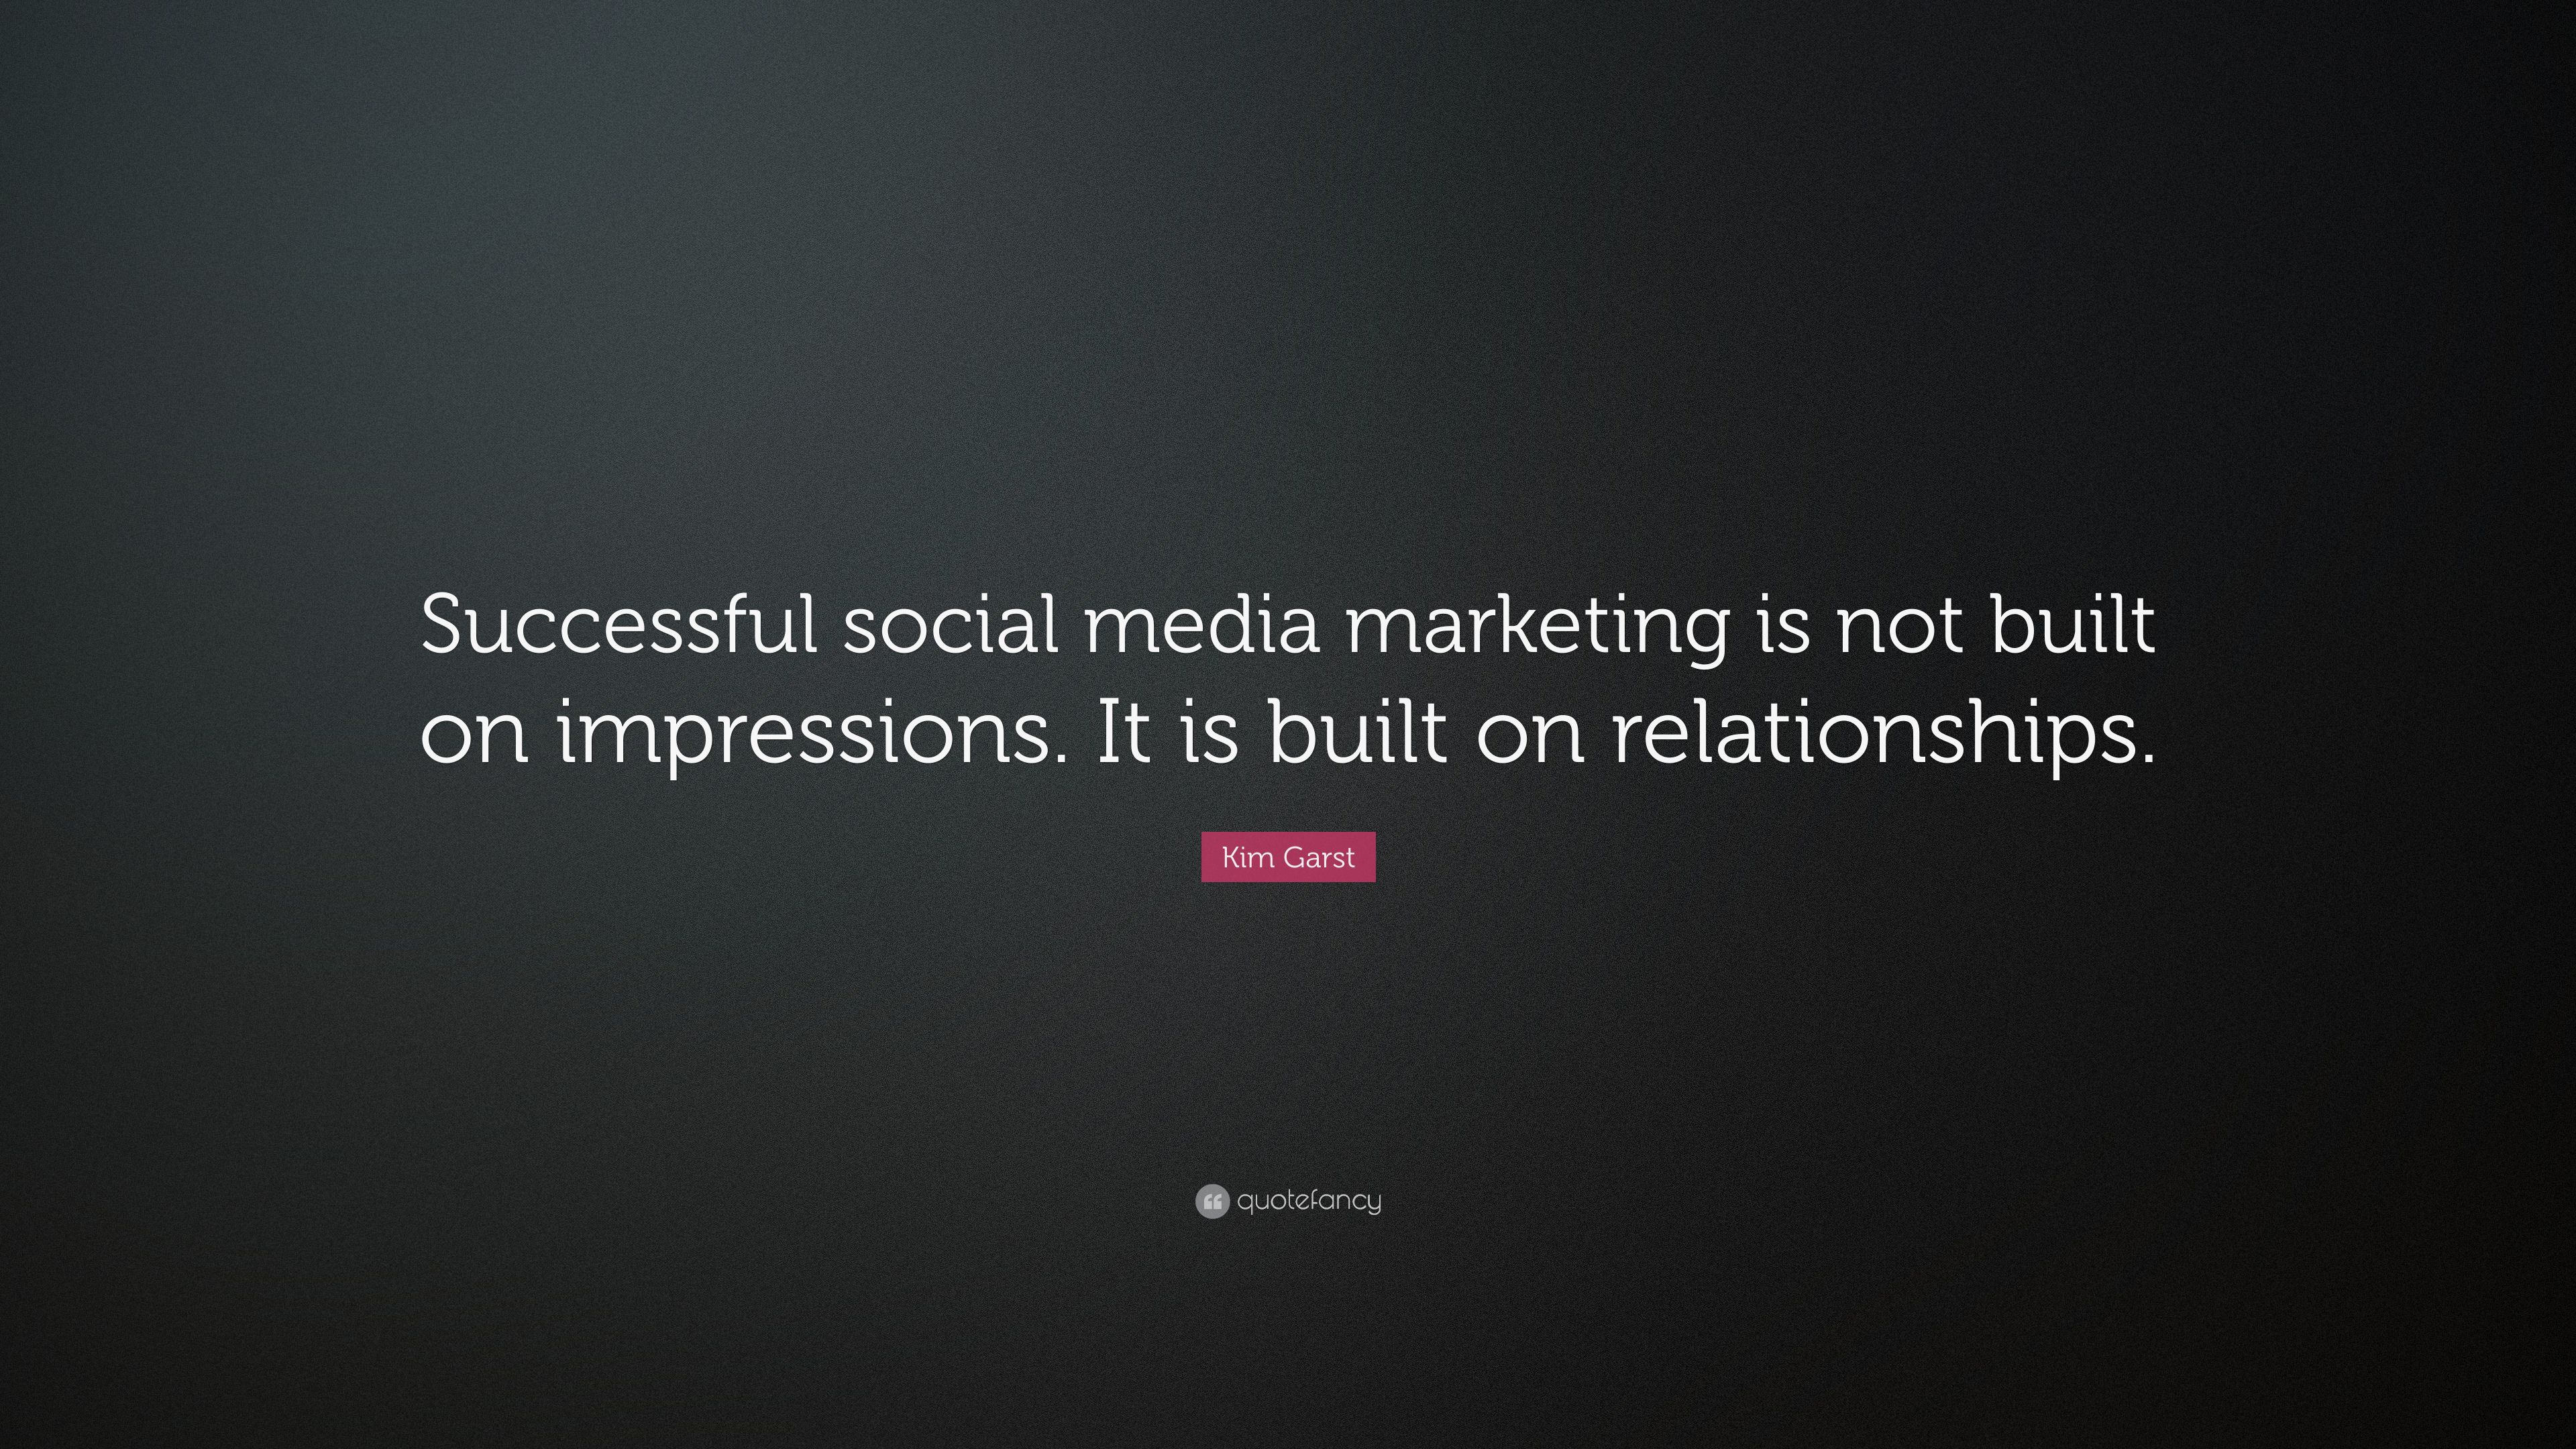 Kim Garst Quote: “Successful social media marketing is not built